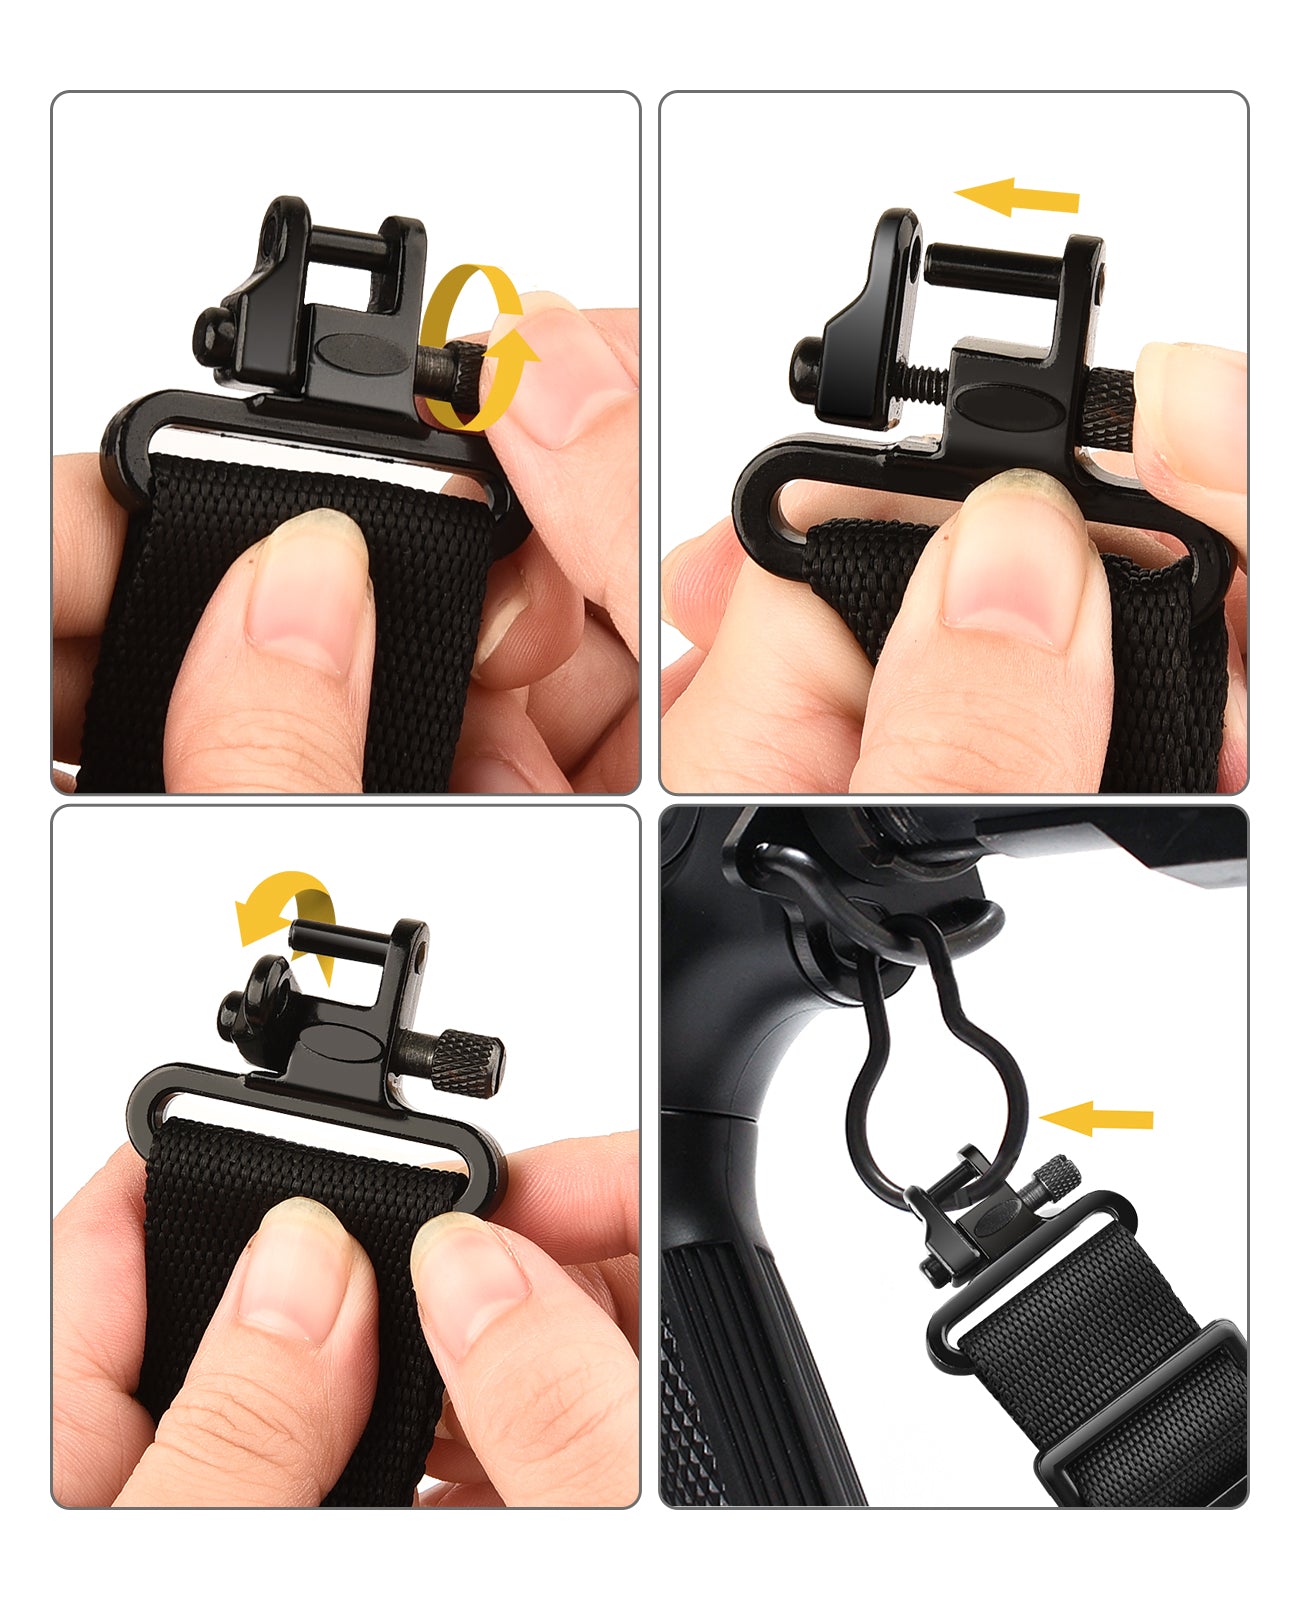 How to install the tri-lock sling swivels?